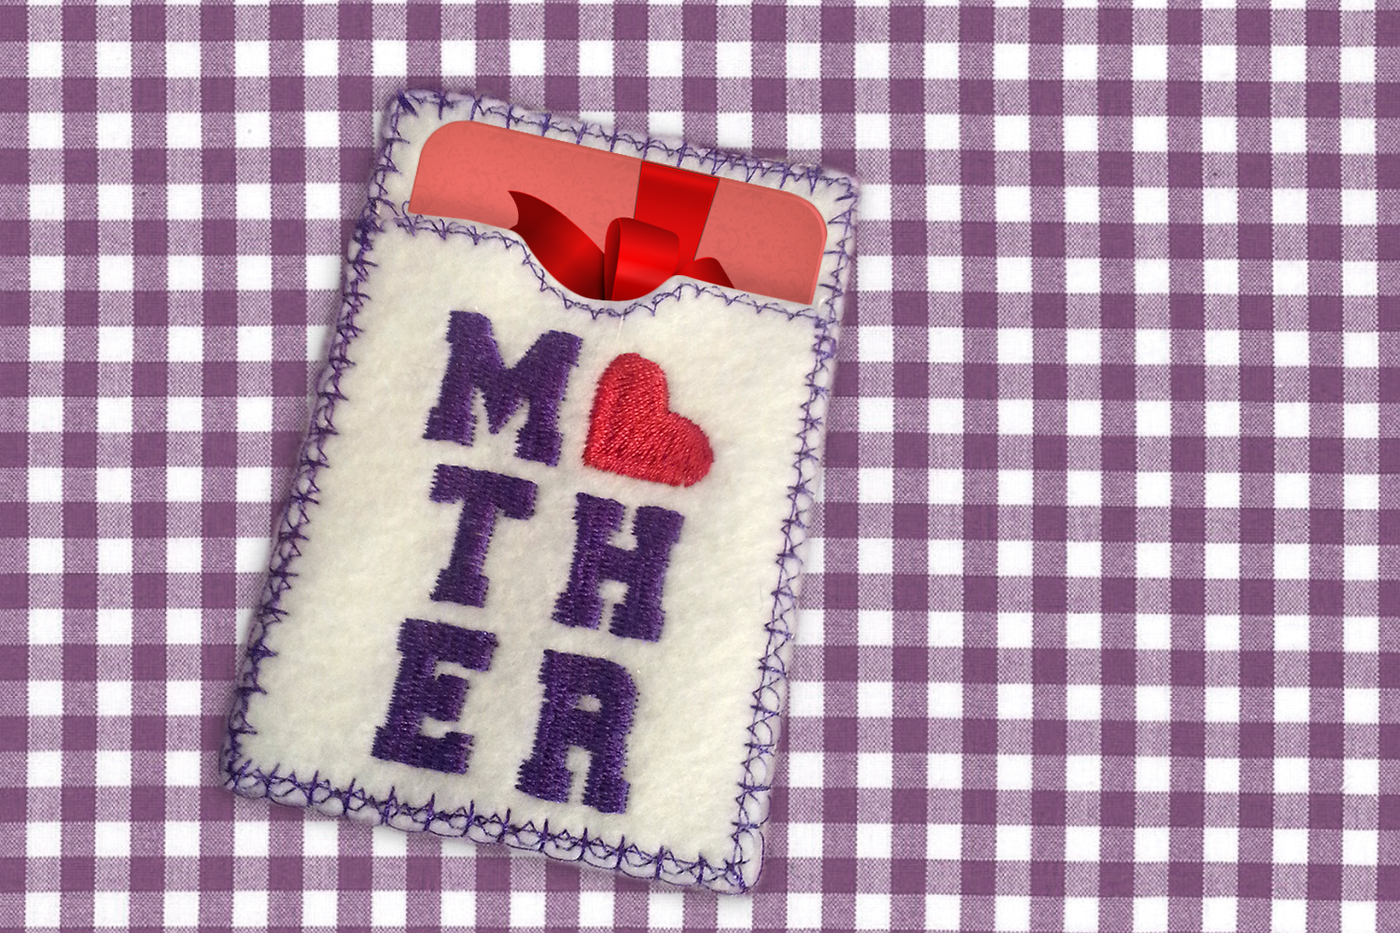 Felt gift card holder with the word "Mother" embroidered onto it. The word is split into 3 lines, and the O is a heart.